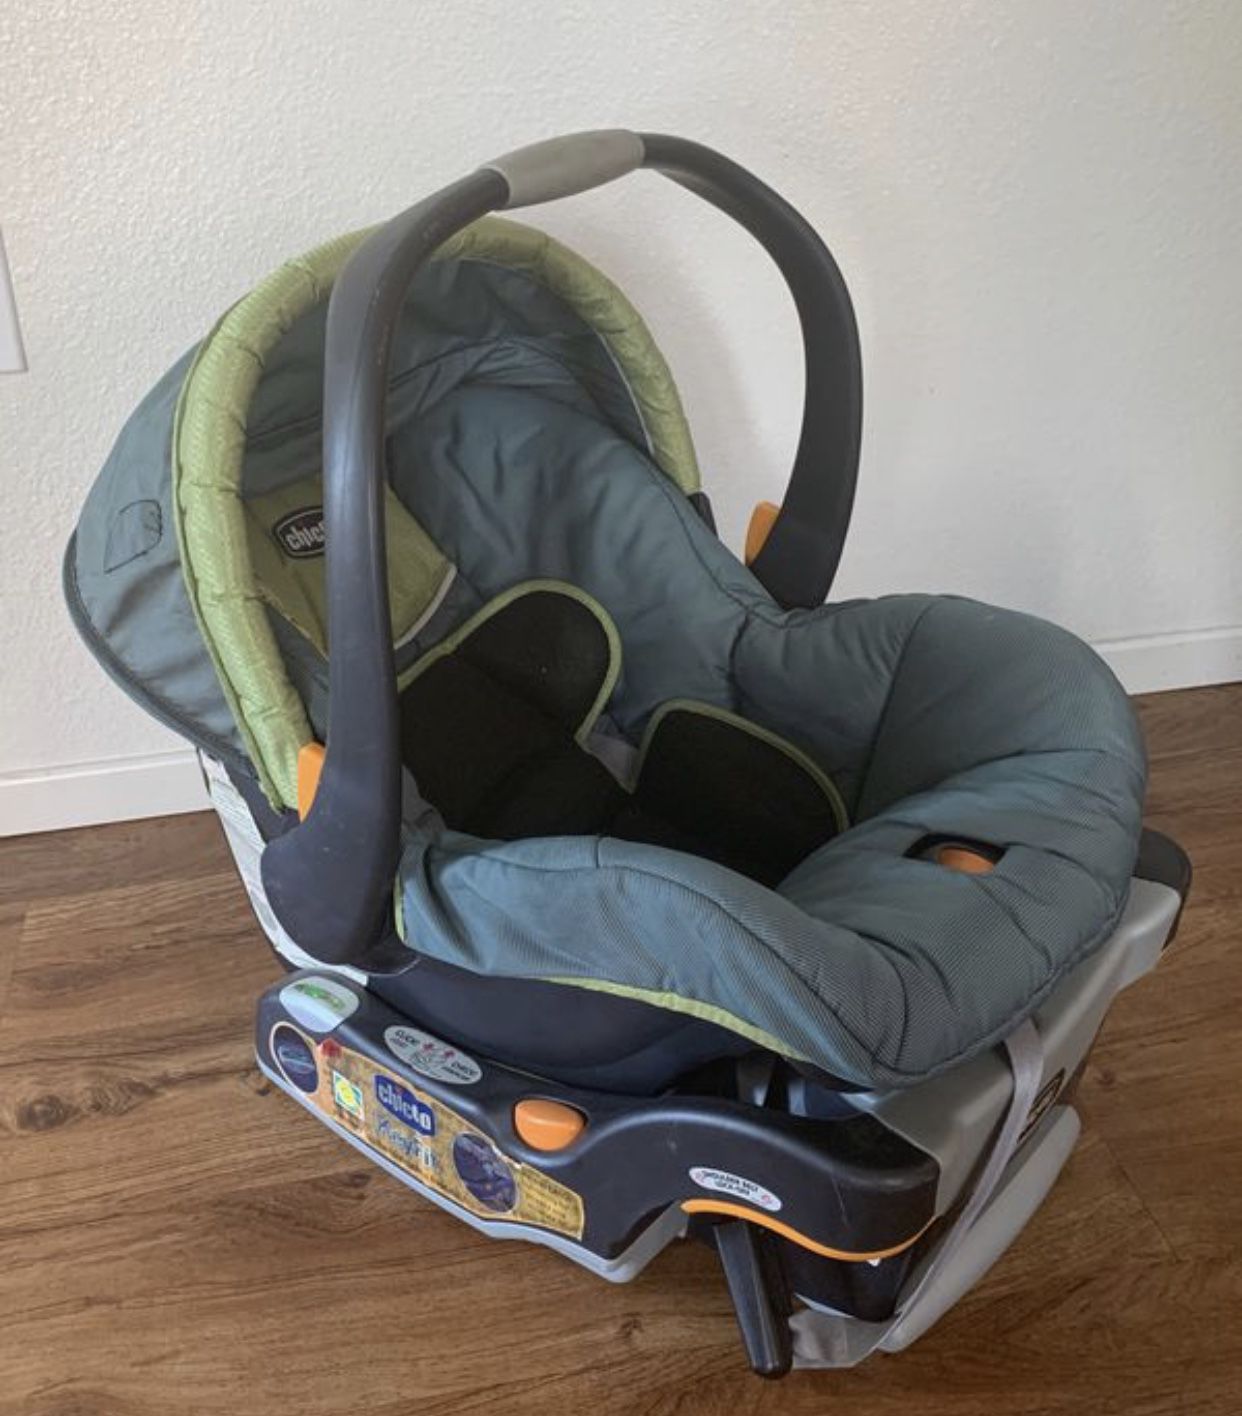 Chico Baby car seat